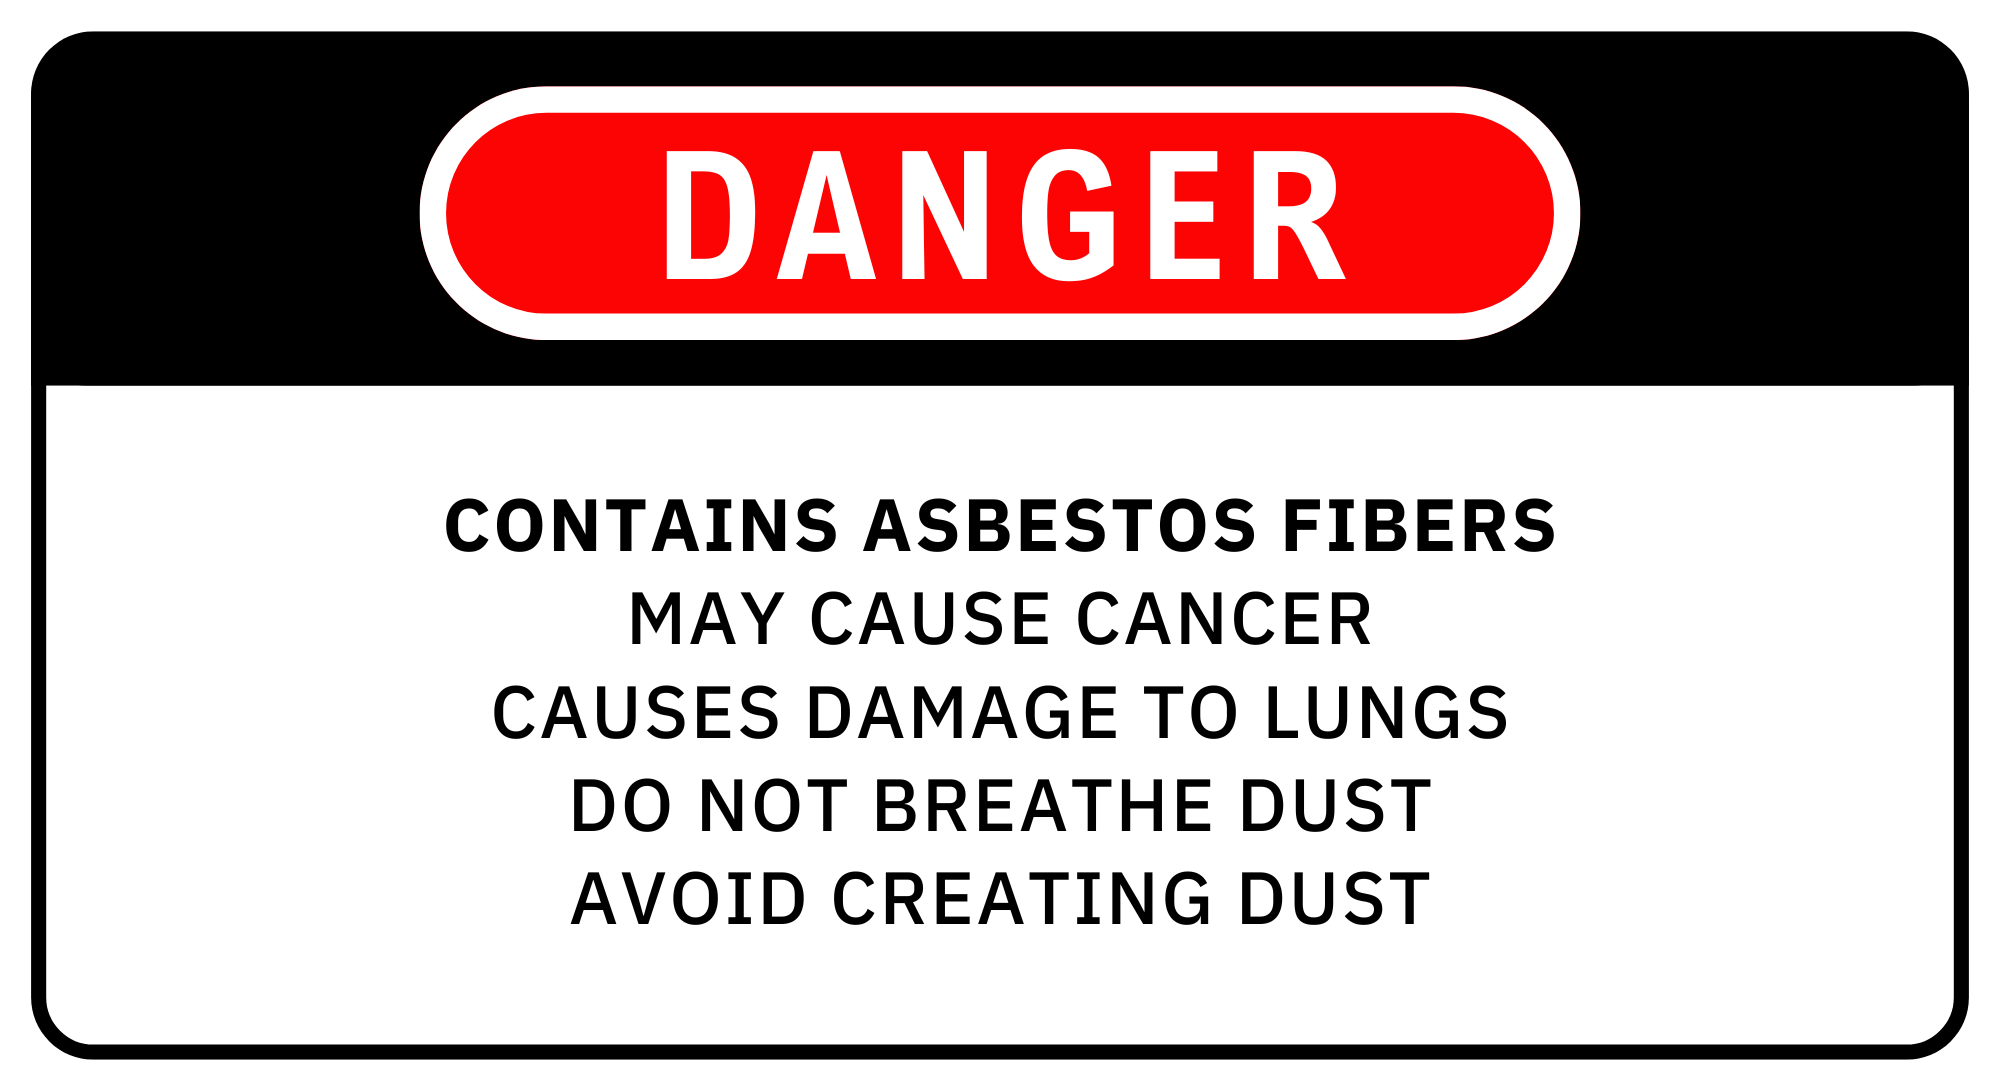 Asbestos danger label. States, 'Contains asbestos fibers. May cause cancer. Causes damage to lungs. Do not breathe dust. Avoid creating dust.'